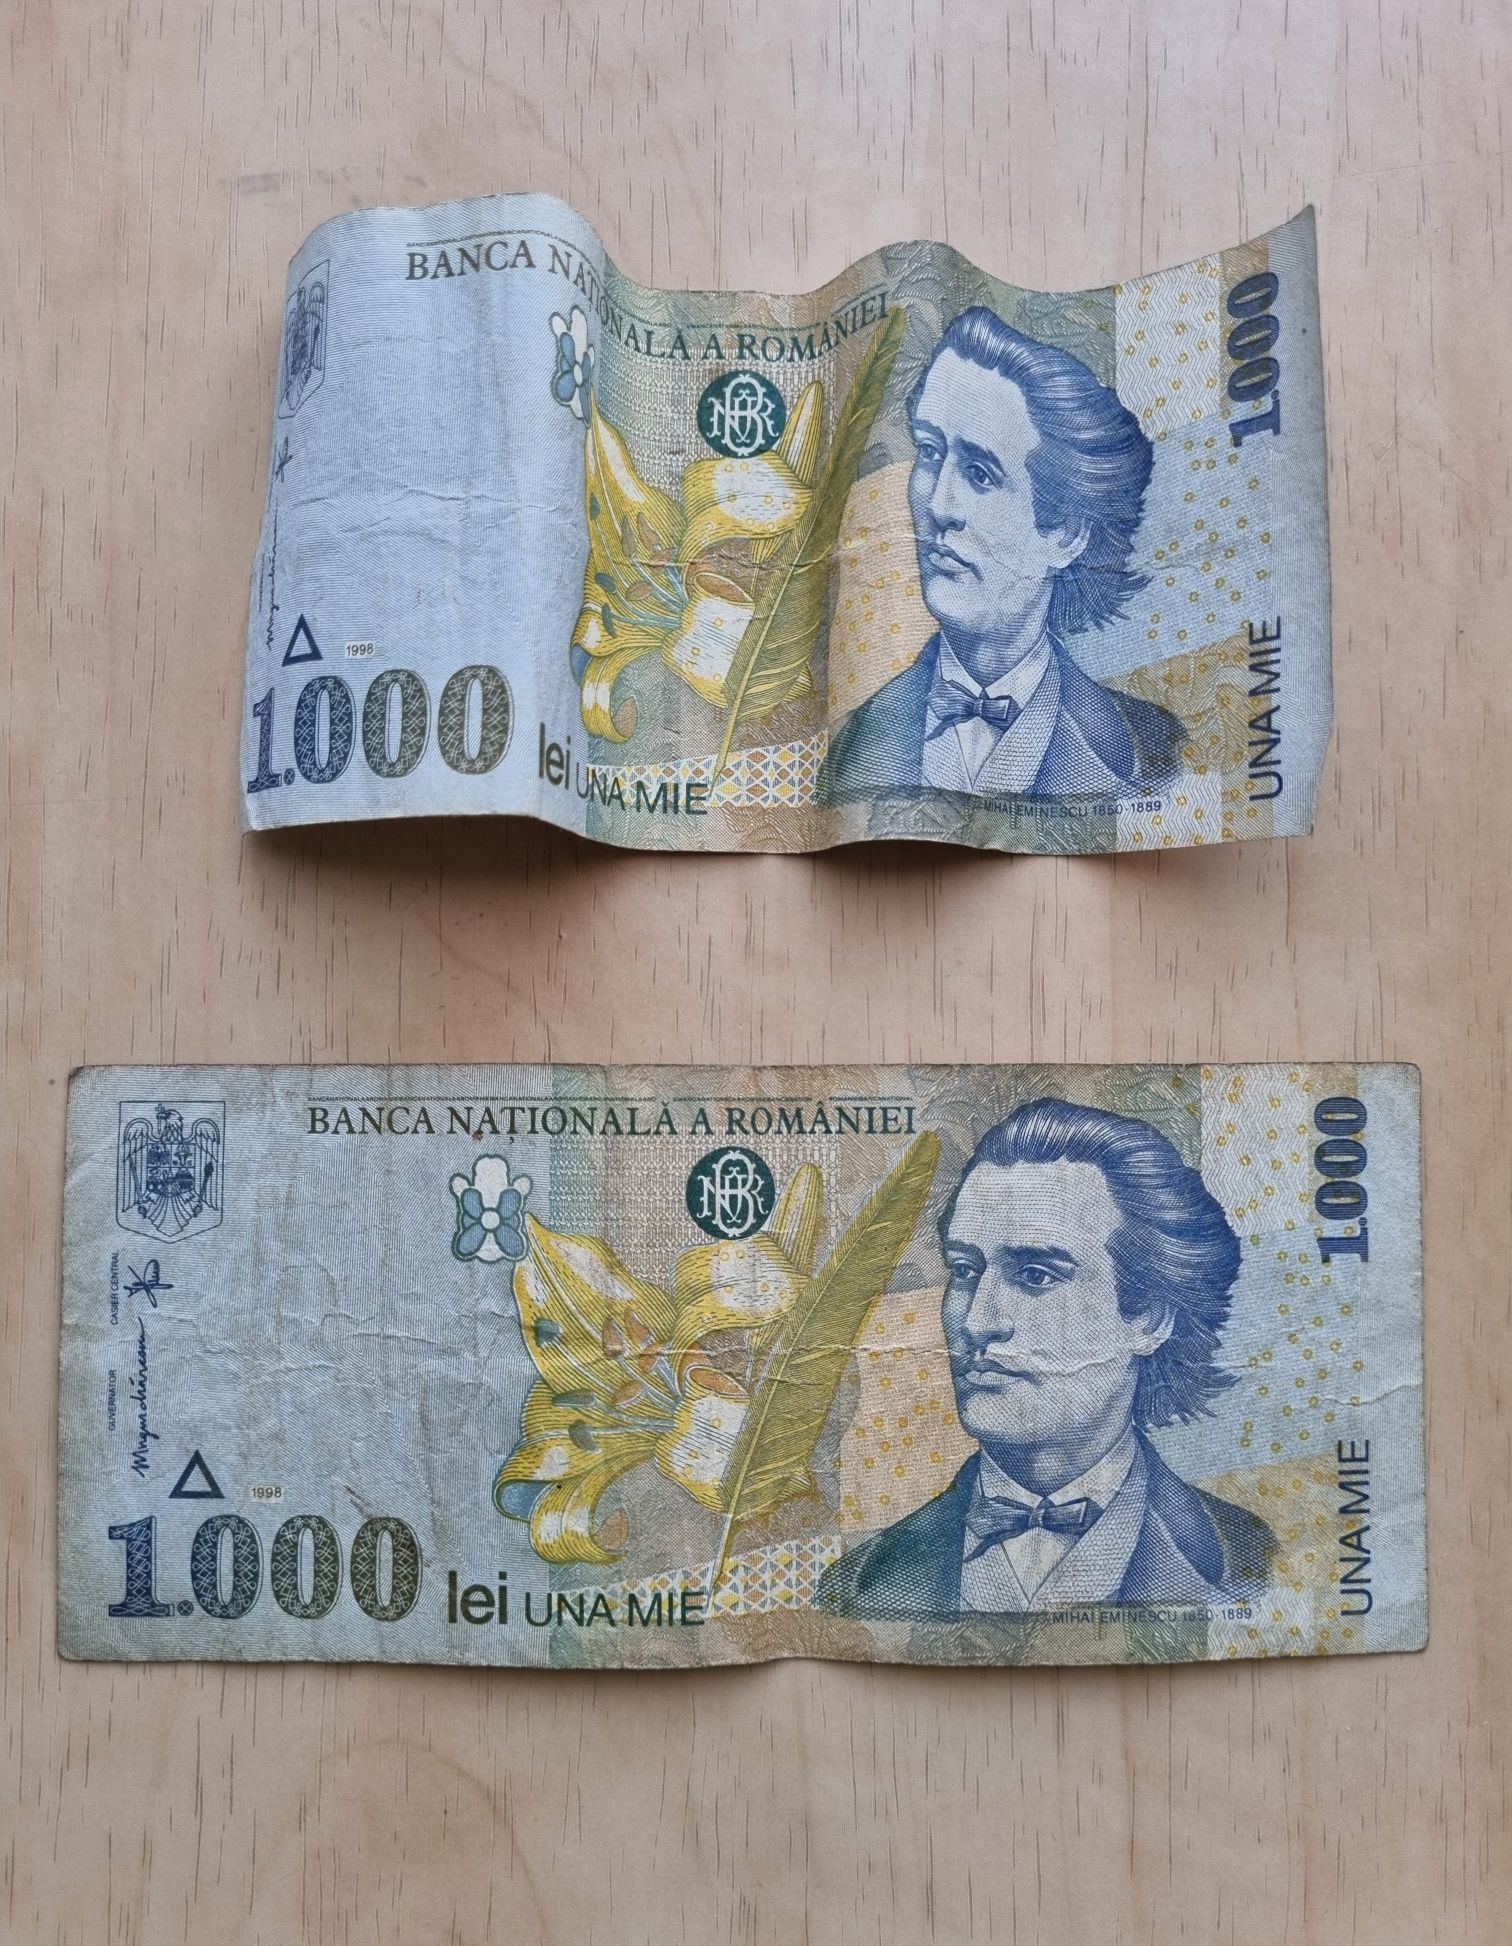 2 Bancnote 1000 lei din anul 1998